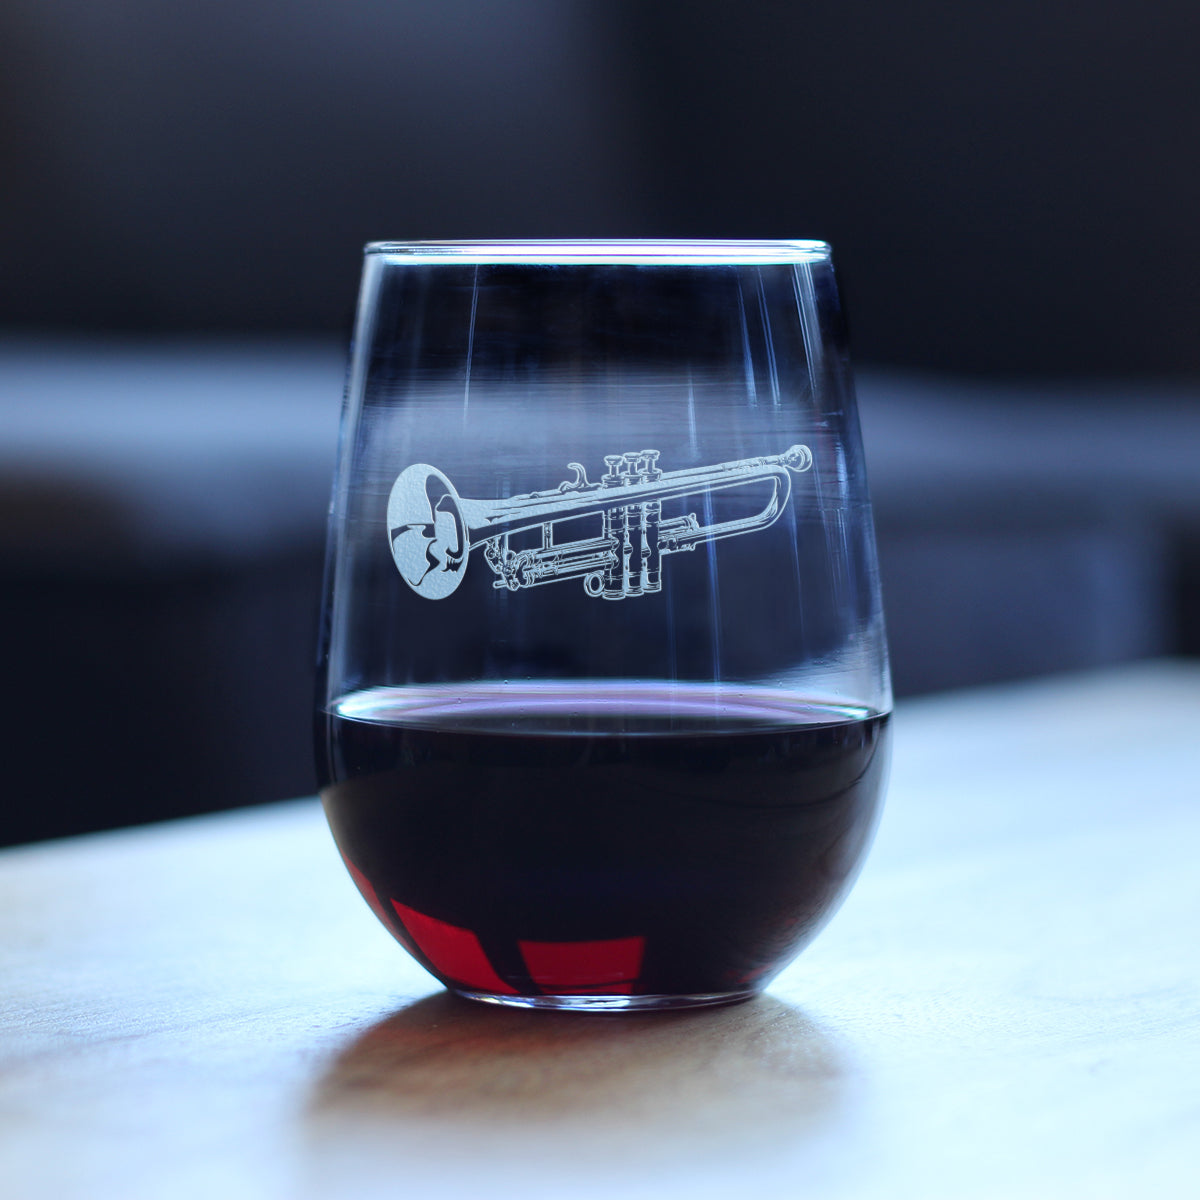 Trumpet Stemless Wine Glass - Music Gifts for Trumpet Players, Teachers and Musical Accessories for Musicians that Play Trumpets - Large 17 Oz Glasses